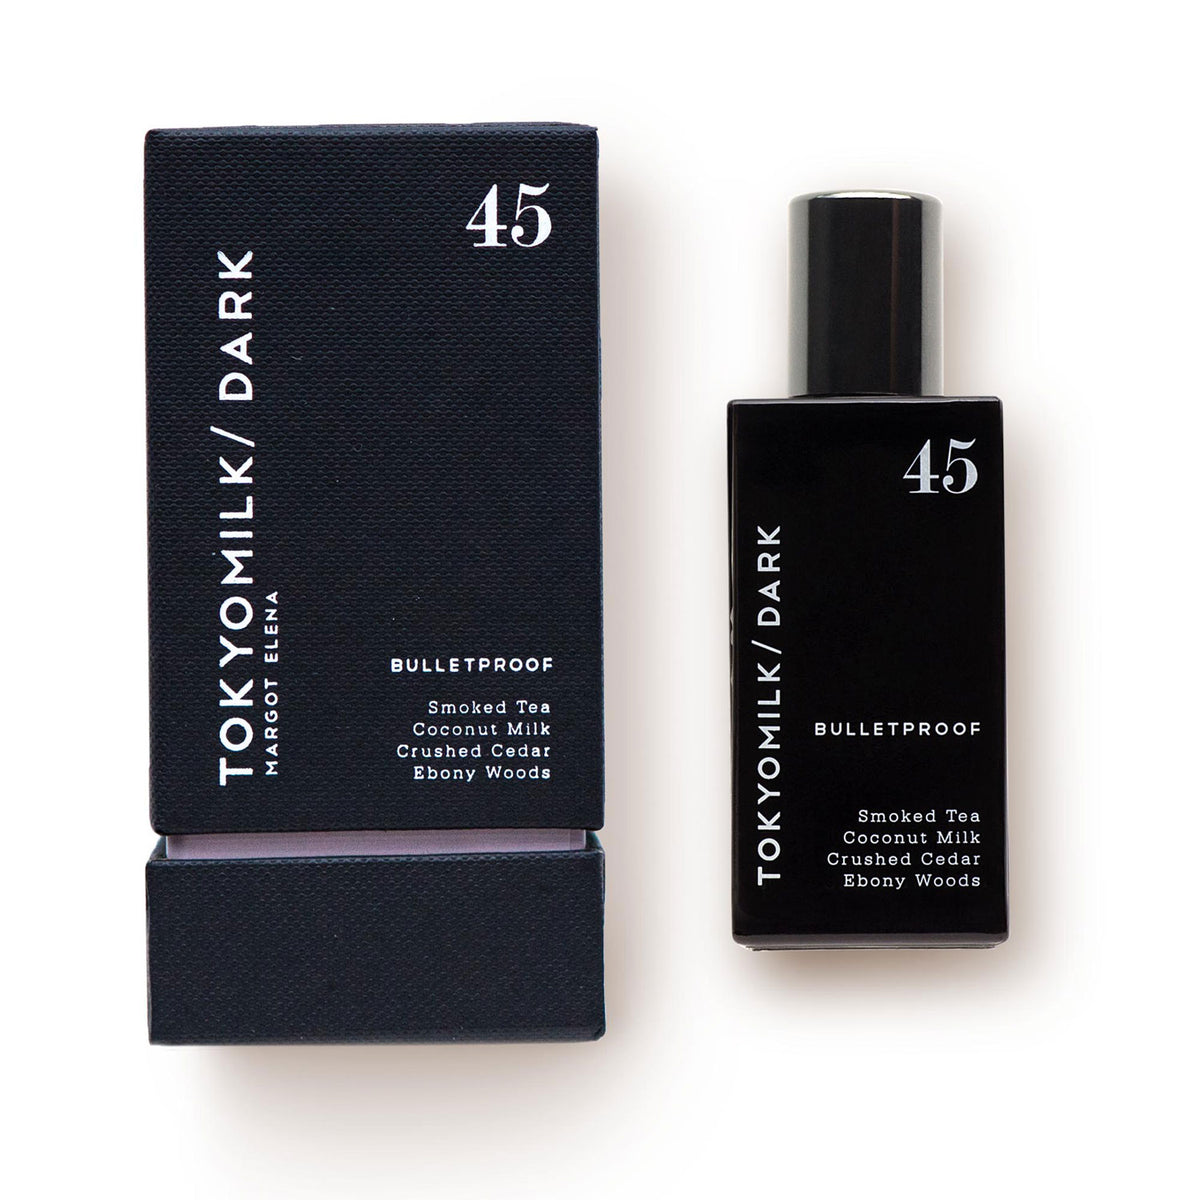 A bottle of Margot Elena's TokyoMilk Dark Bulletproof No. 45 Eau de Parfum next to its packaging box. The bottle and box are black, with white text listing the fragrance notes: smoked tea, coconut.